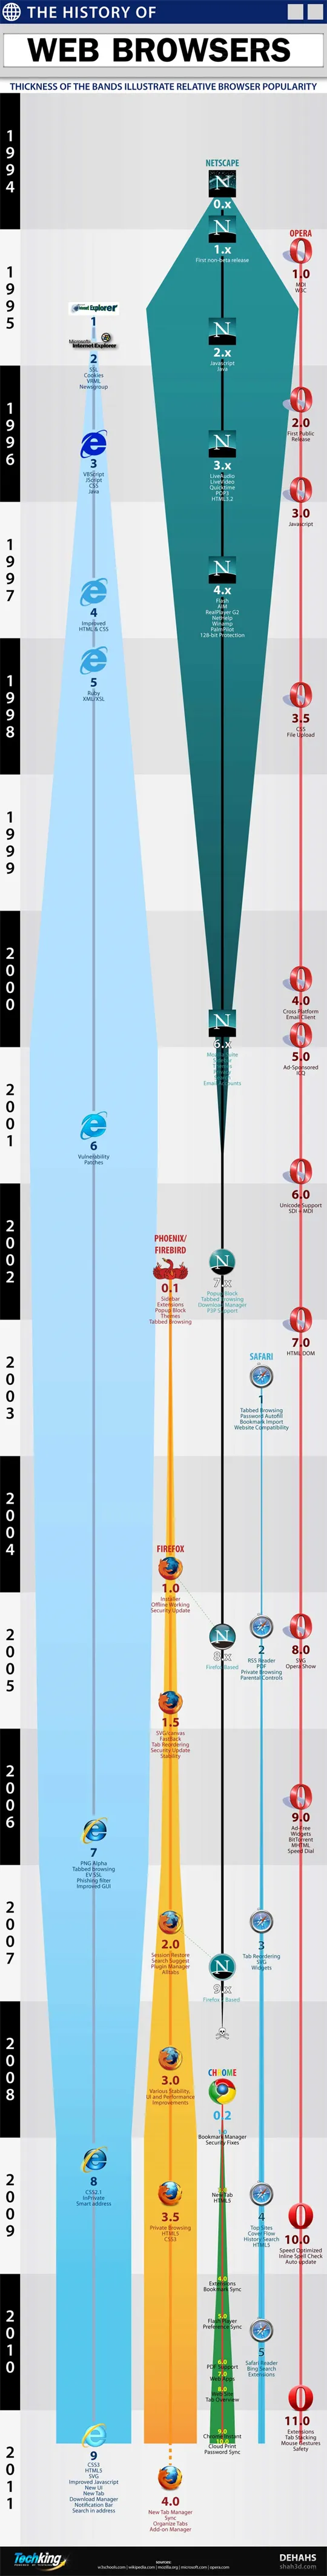 The Evolution Of Web Browsers (Infographic) 10